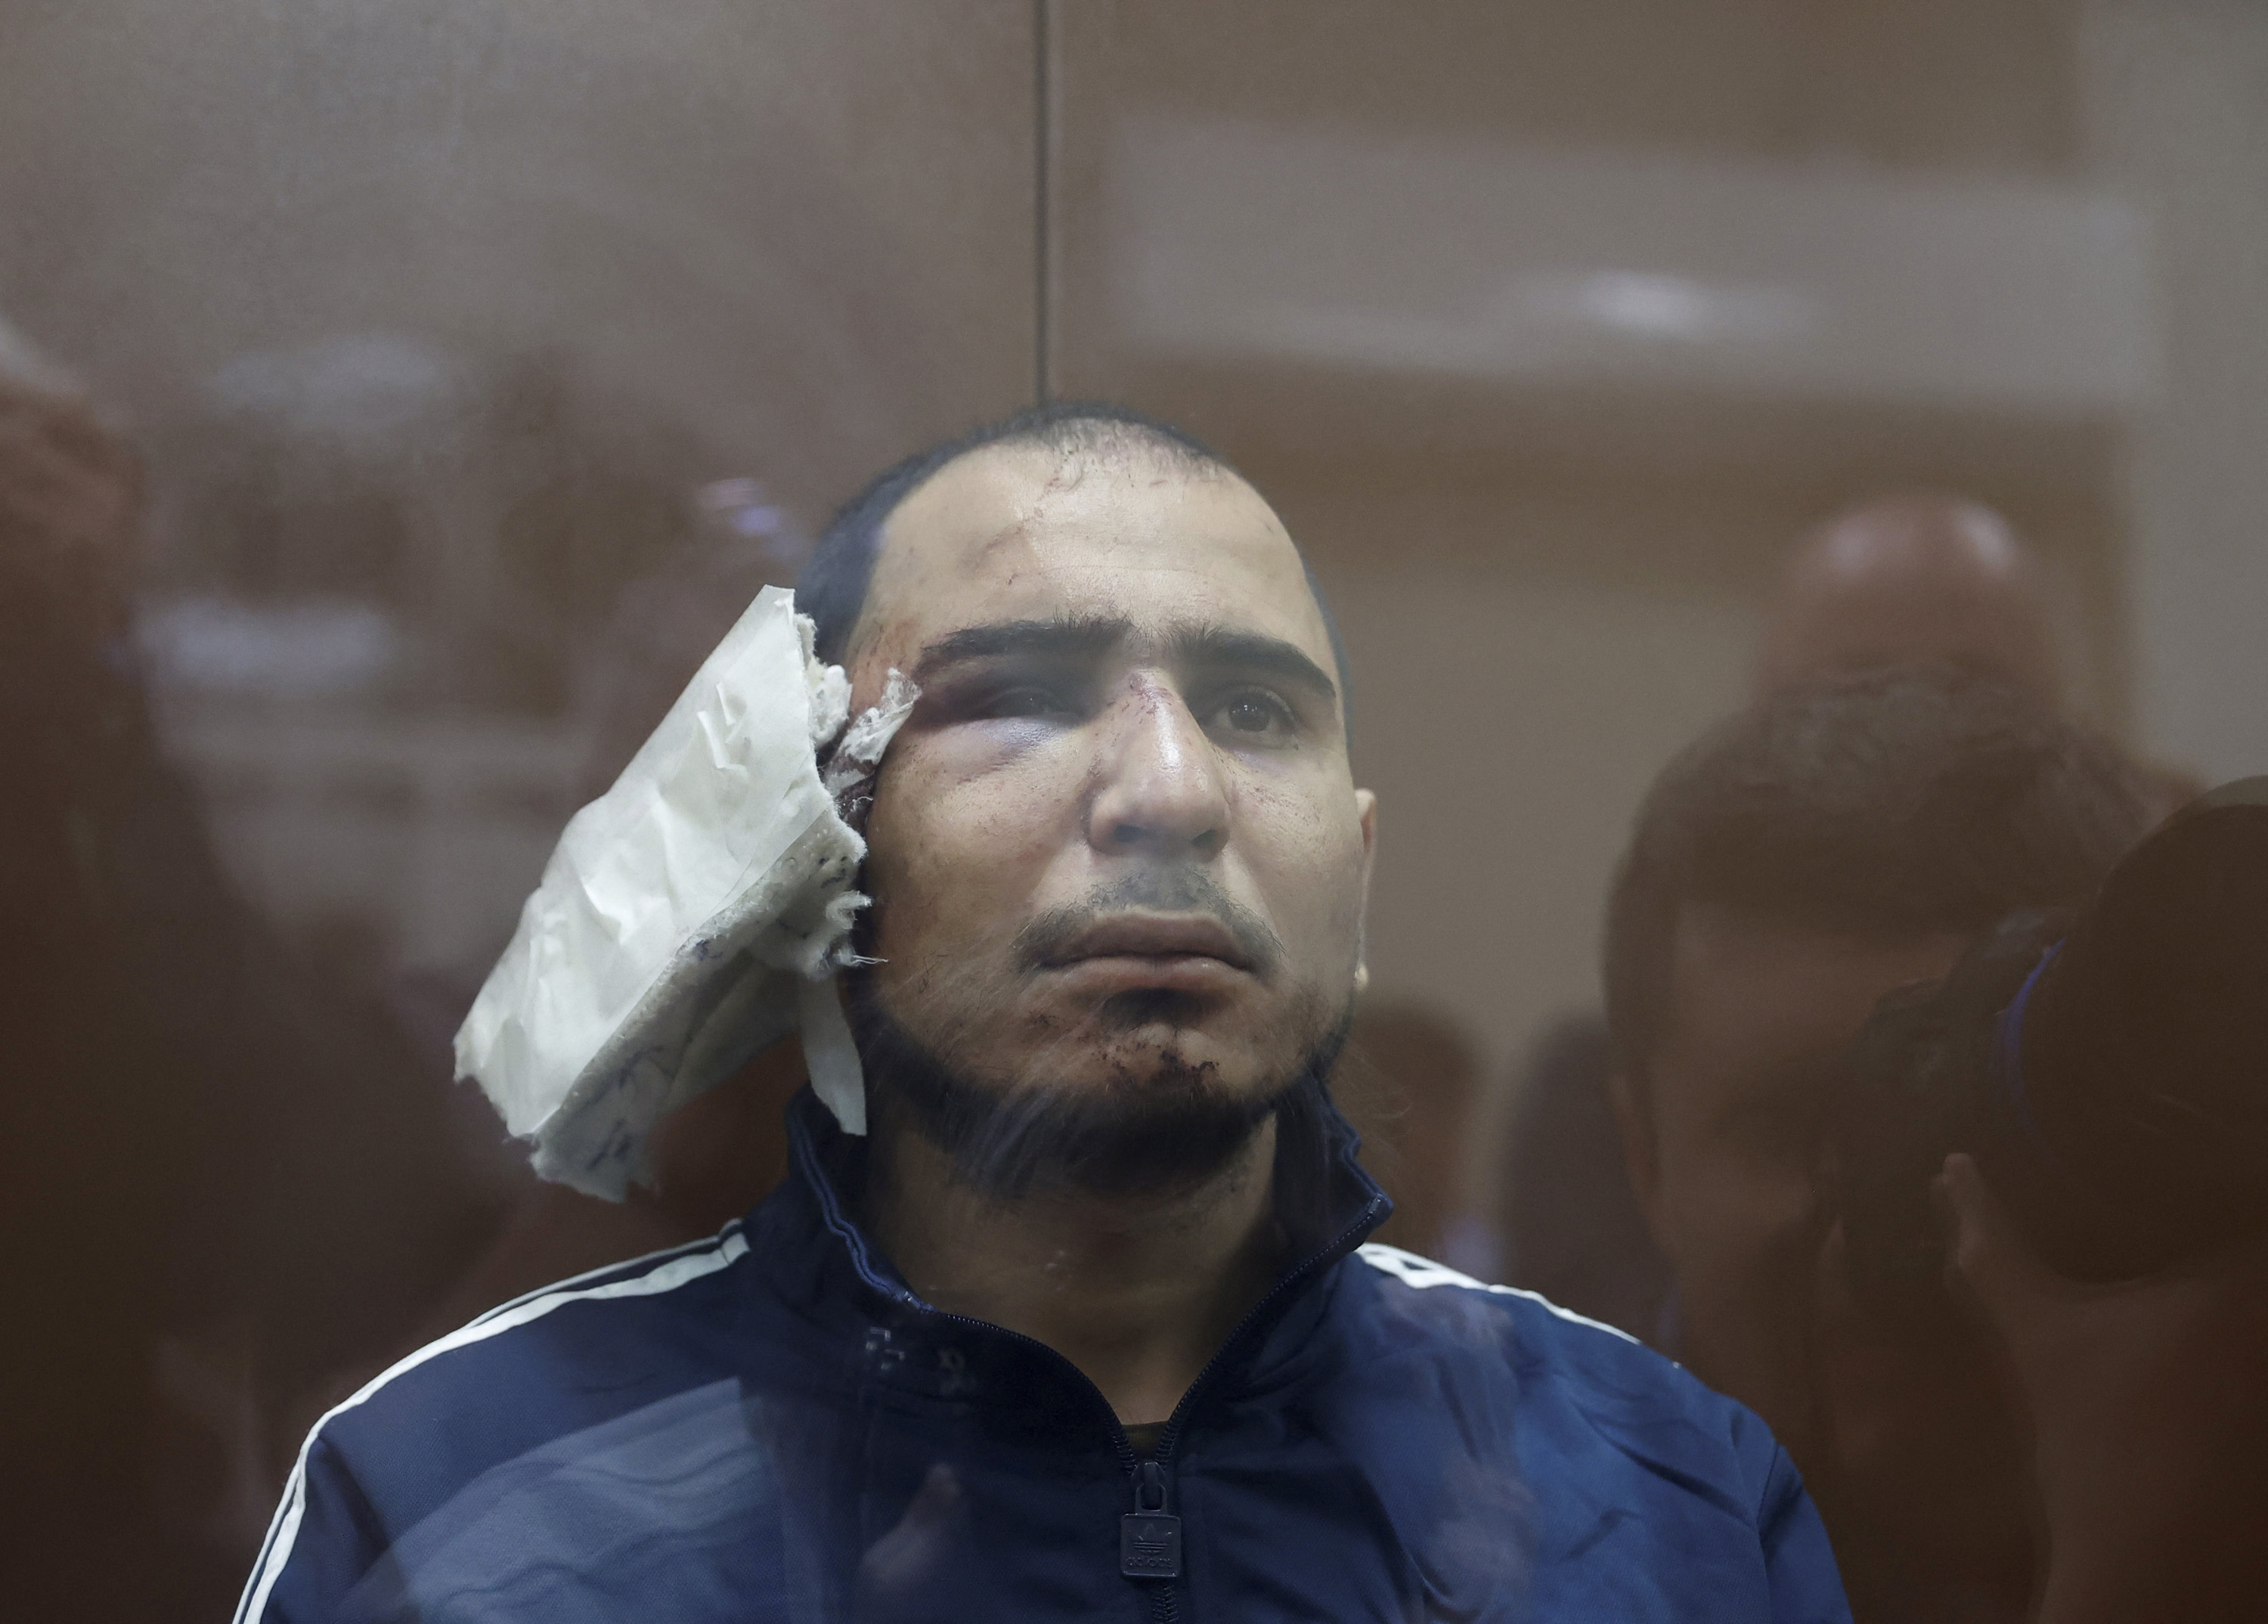 Saidakrami Rachabalizoda, a suspect in the shooting attack at the Crocus City Hall concert venue, appears behind a glass wall of an enclosure for defendants at the Basmanny district court in Moscow, Russia, on March 24. 